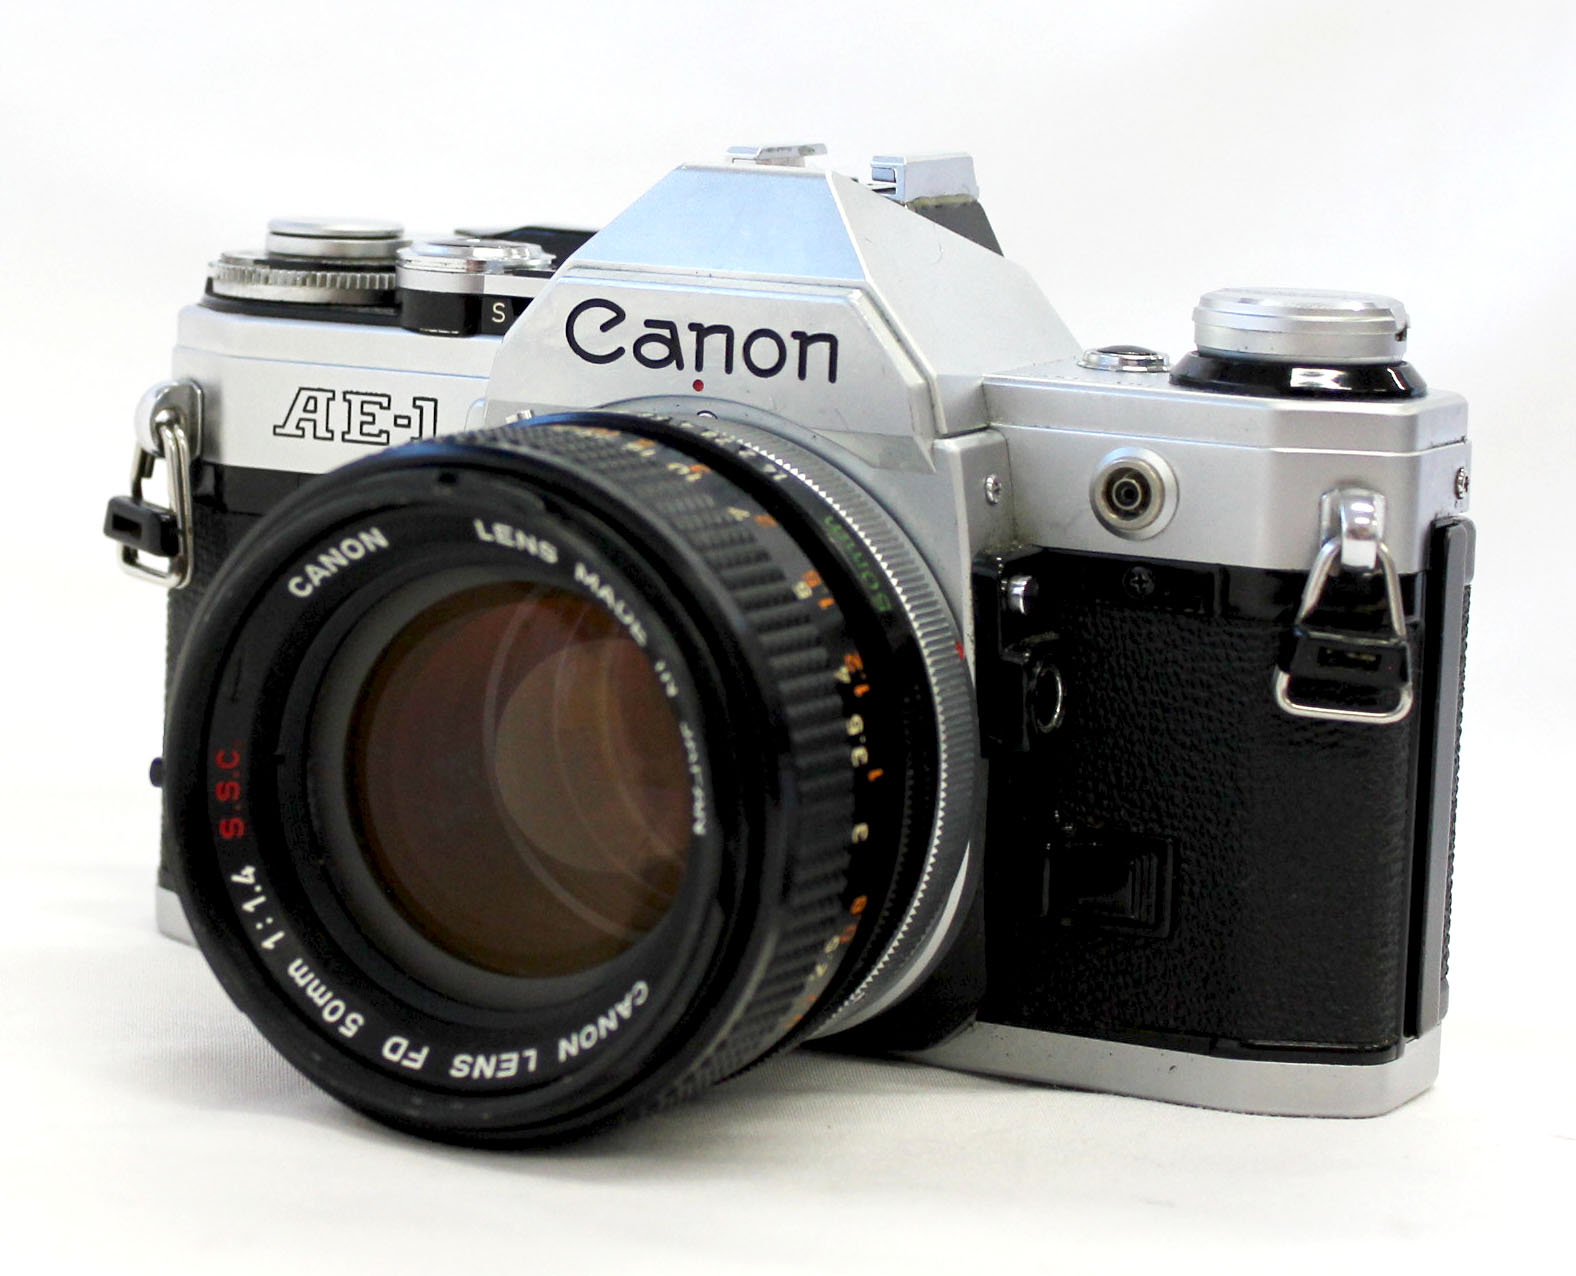 Japan Used Camera Shop | [Excellent++] Canon AE-1 35mm SLR Camera with FD 50mm F/1.4 S.S.C. Lens from Japan